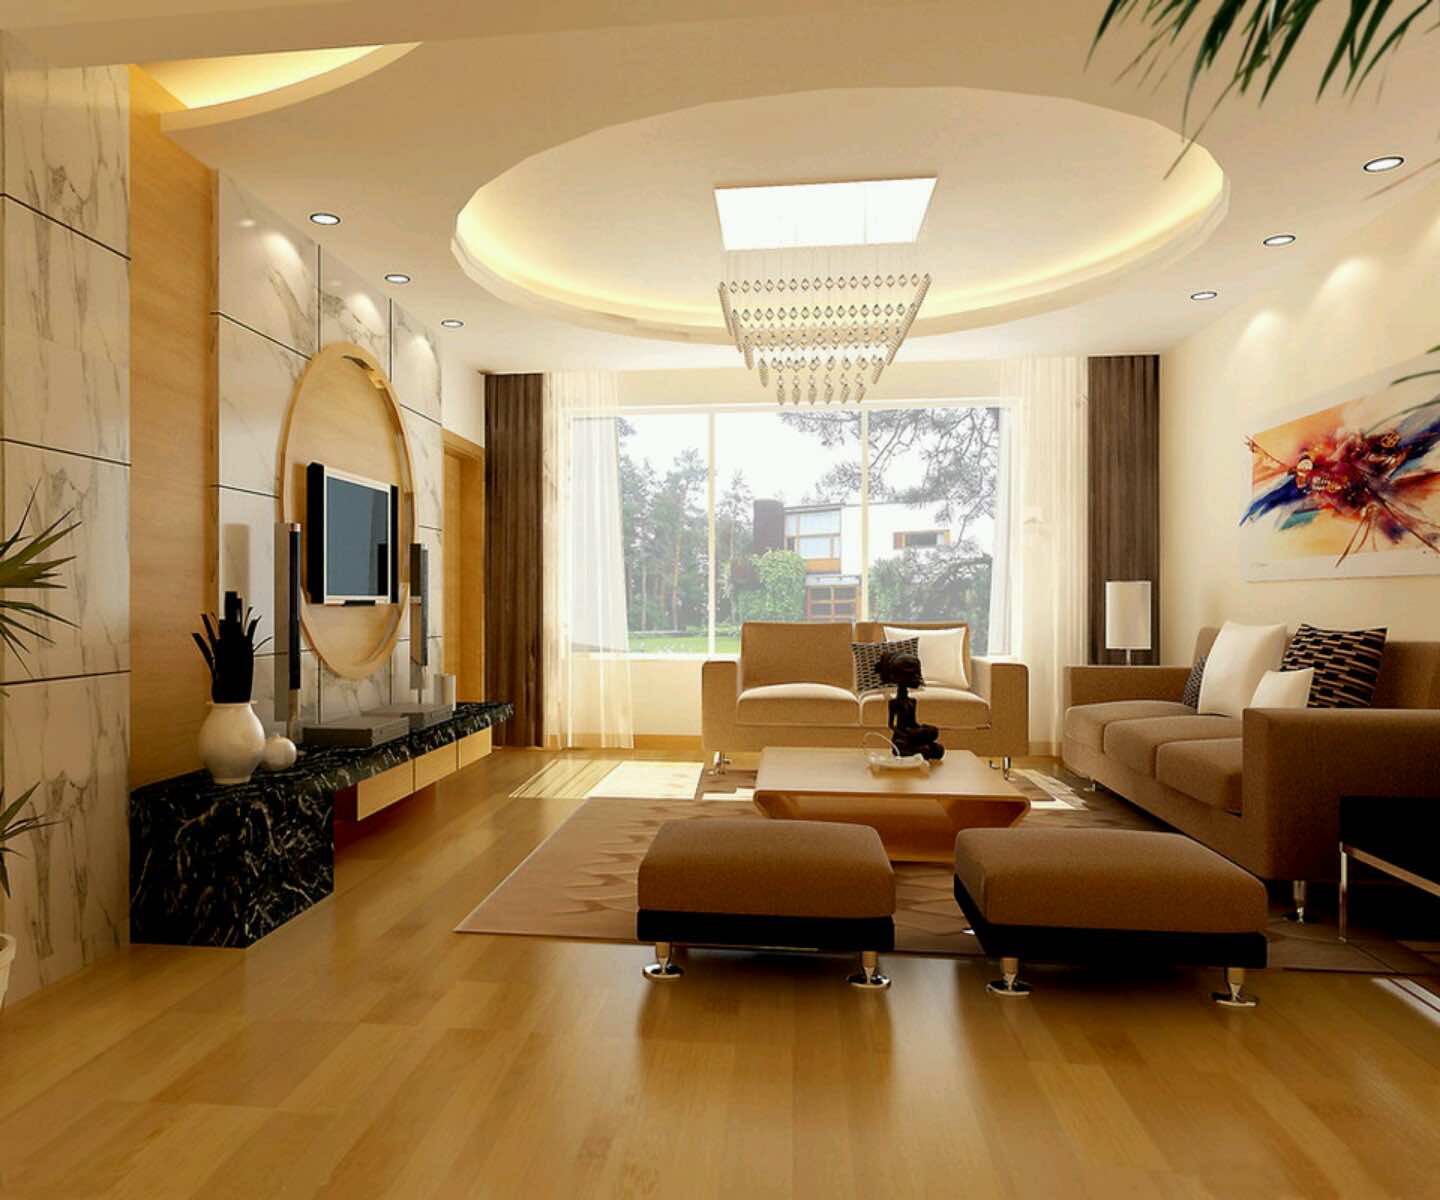 Ceiling Styles And Designs For Living Room